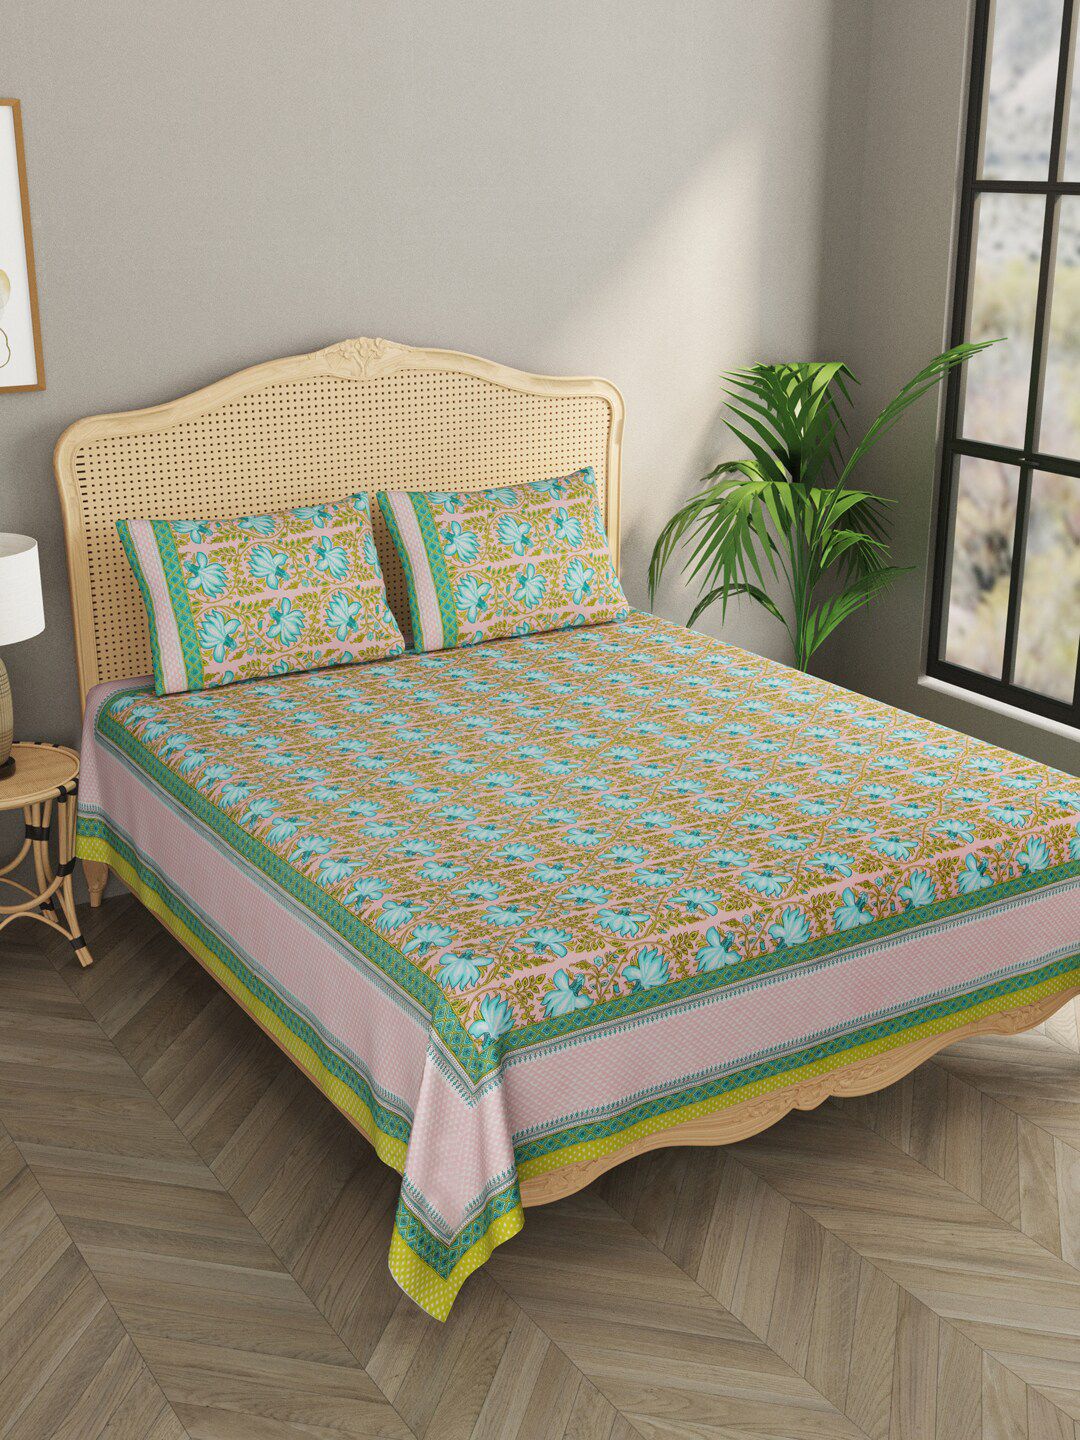 Gulaab Jaipur Blue & Green Cotton 600 TC King Bedsheet with 2 Pillow Covers Price in India